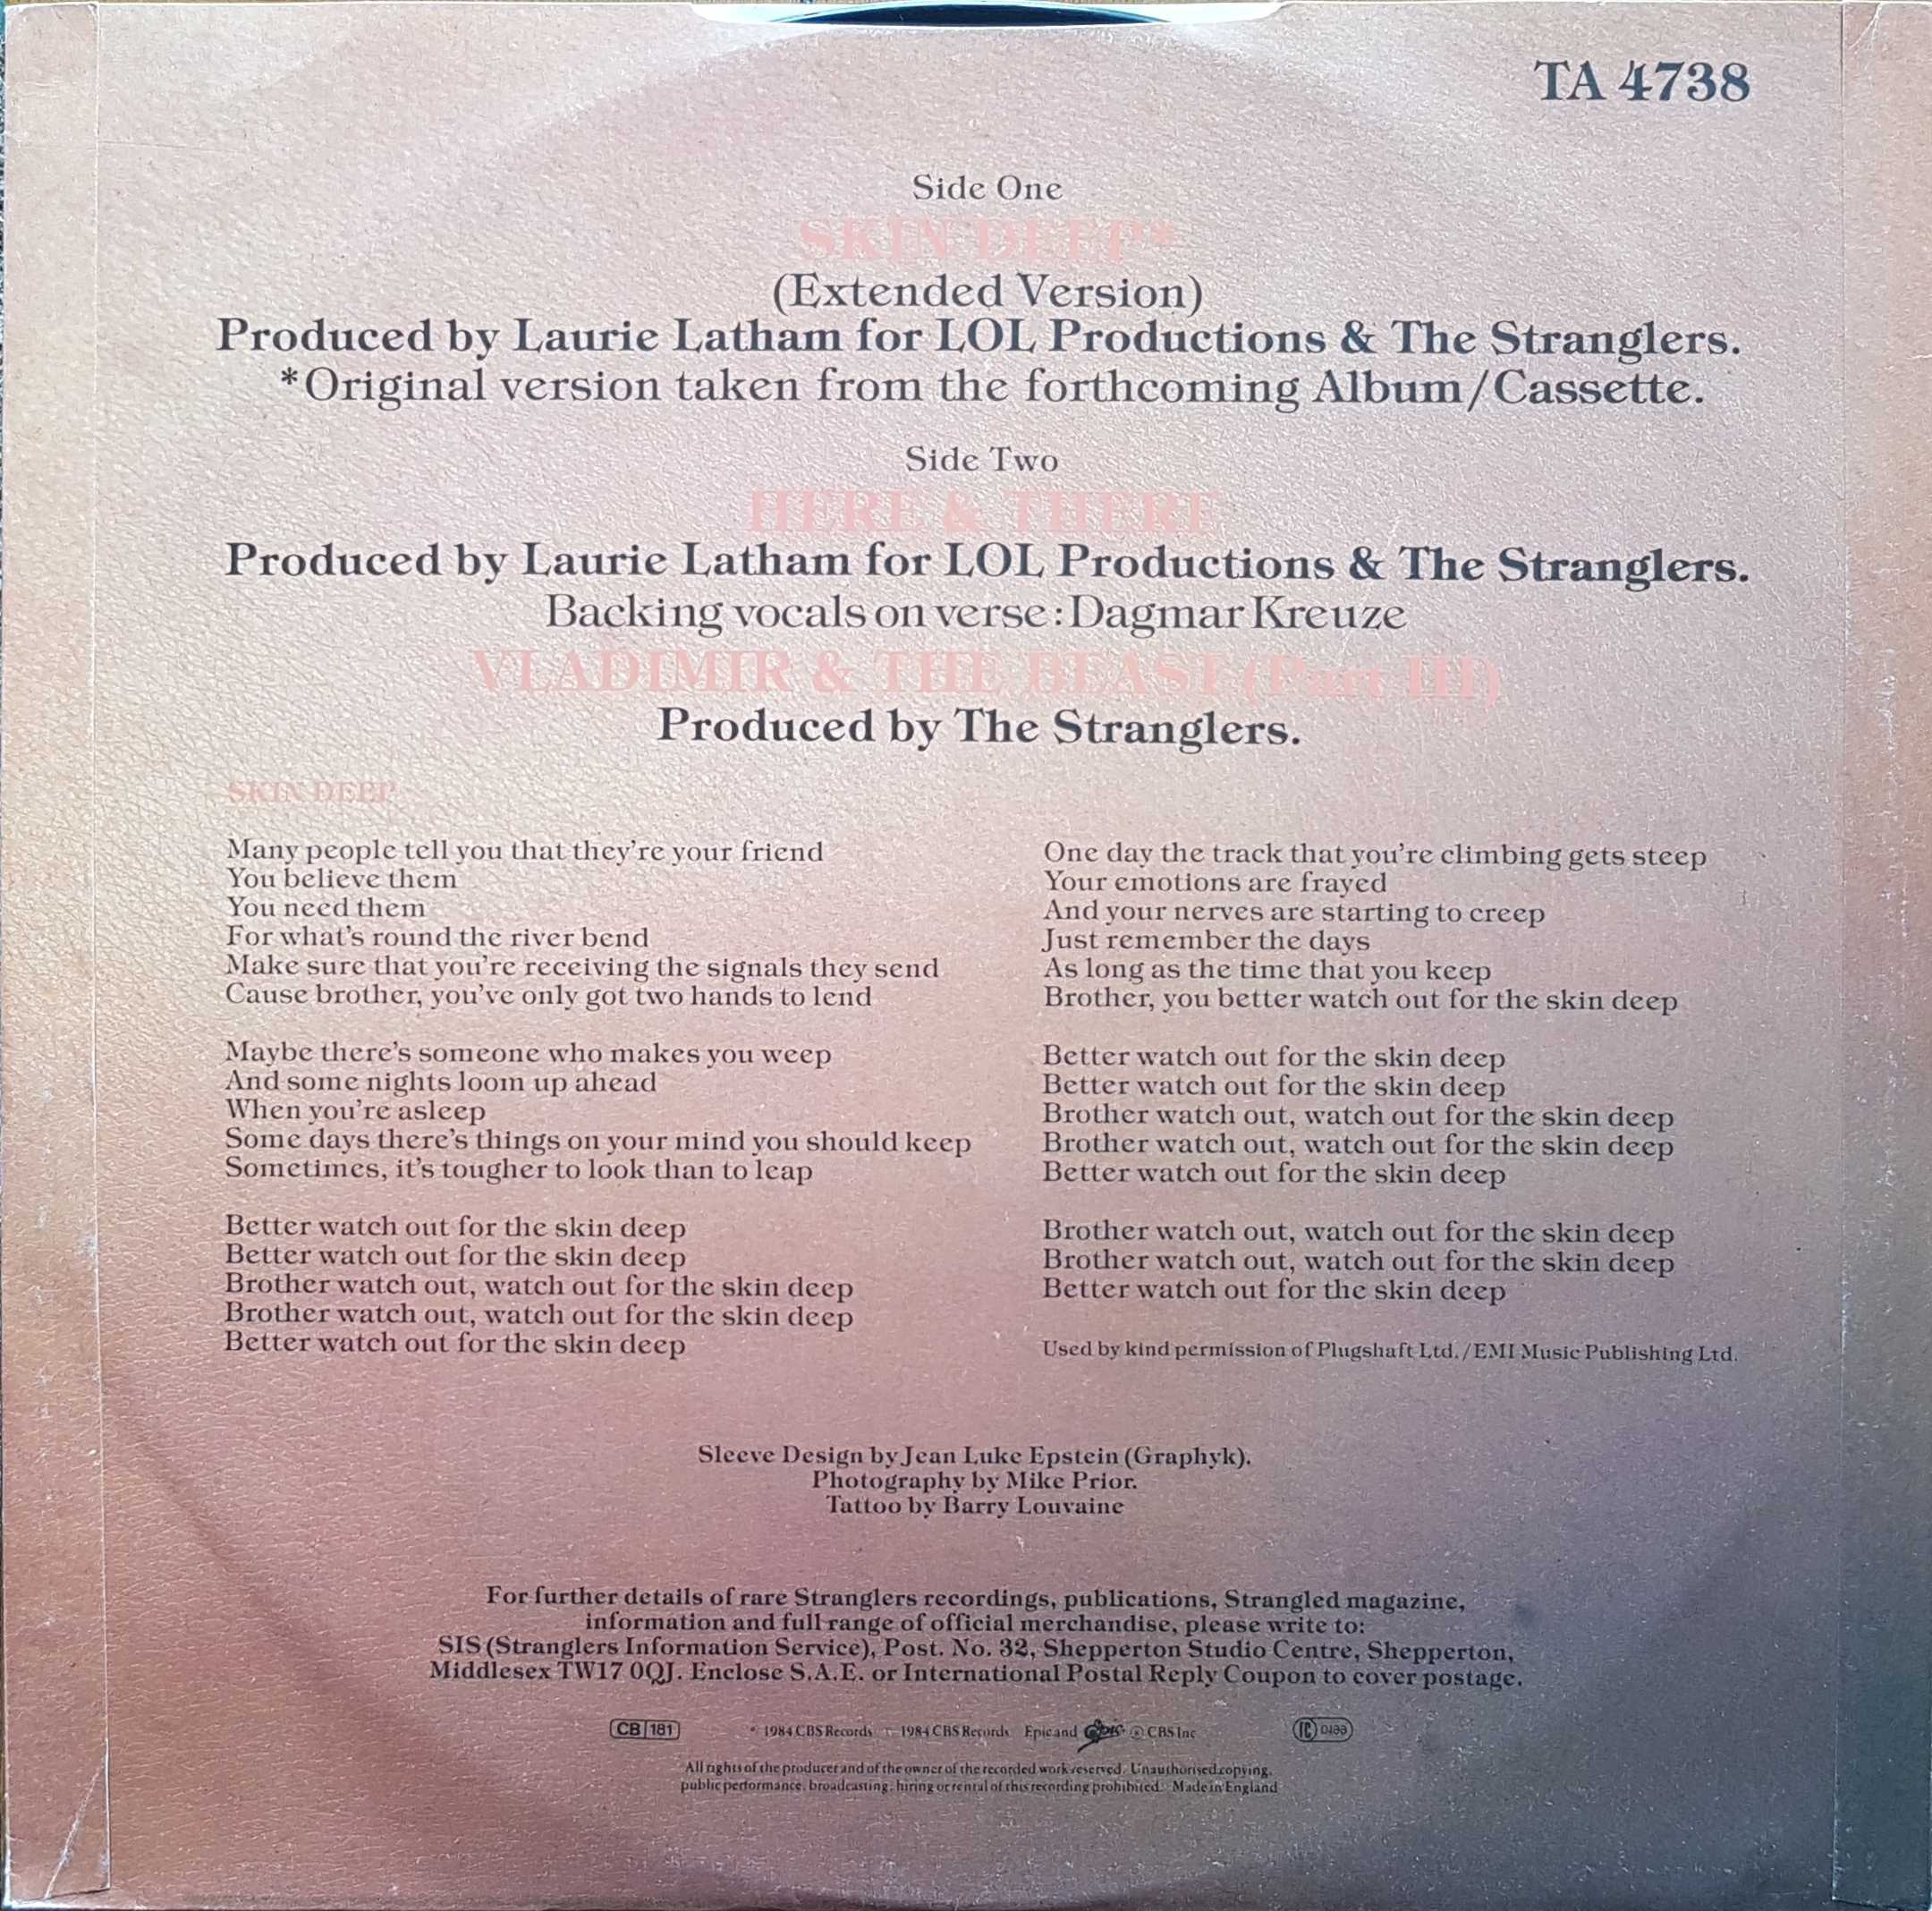 Back cover of TA 4738